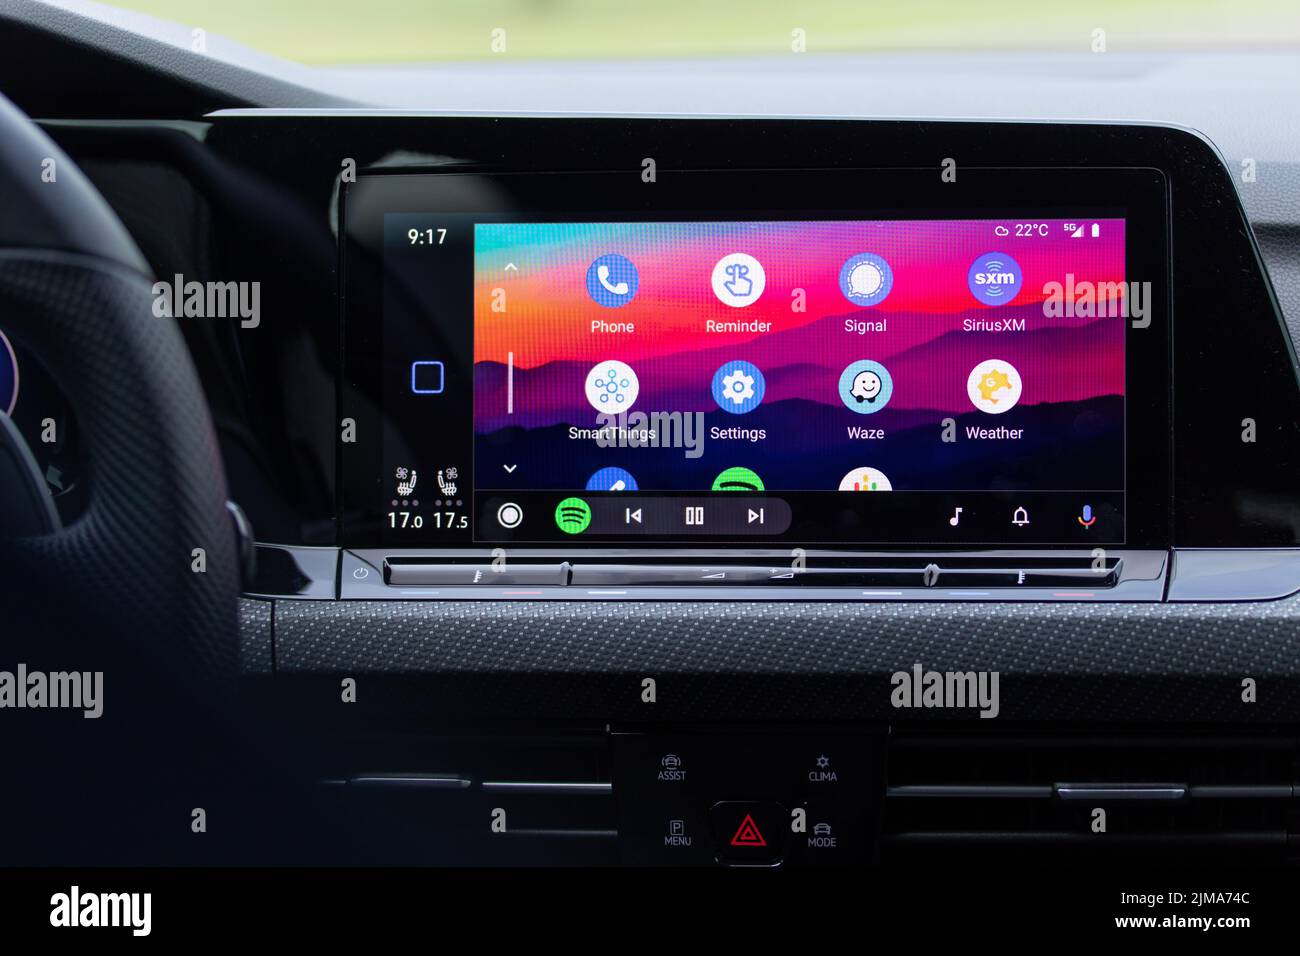 The Android Auto home screen, an app developed by Google is seen on the screen of a new car. Stock Photo